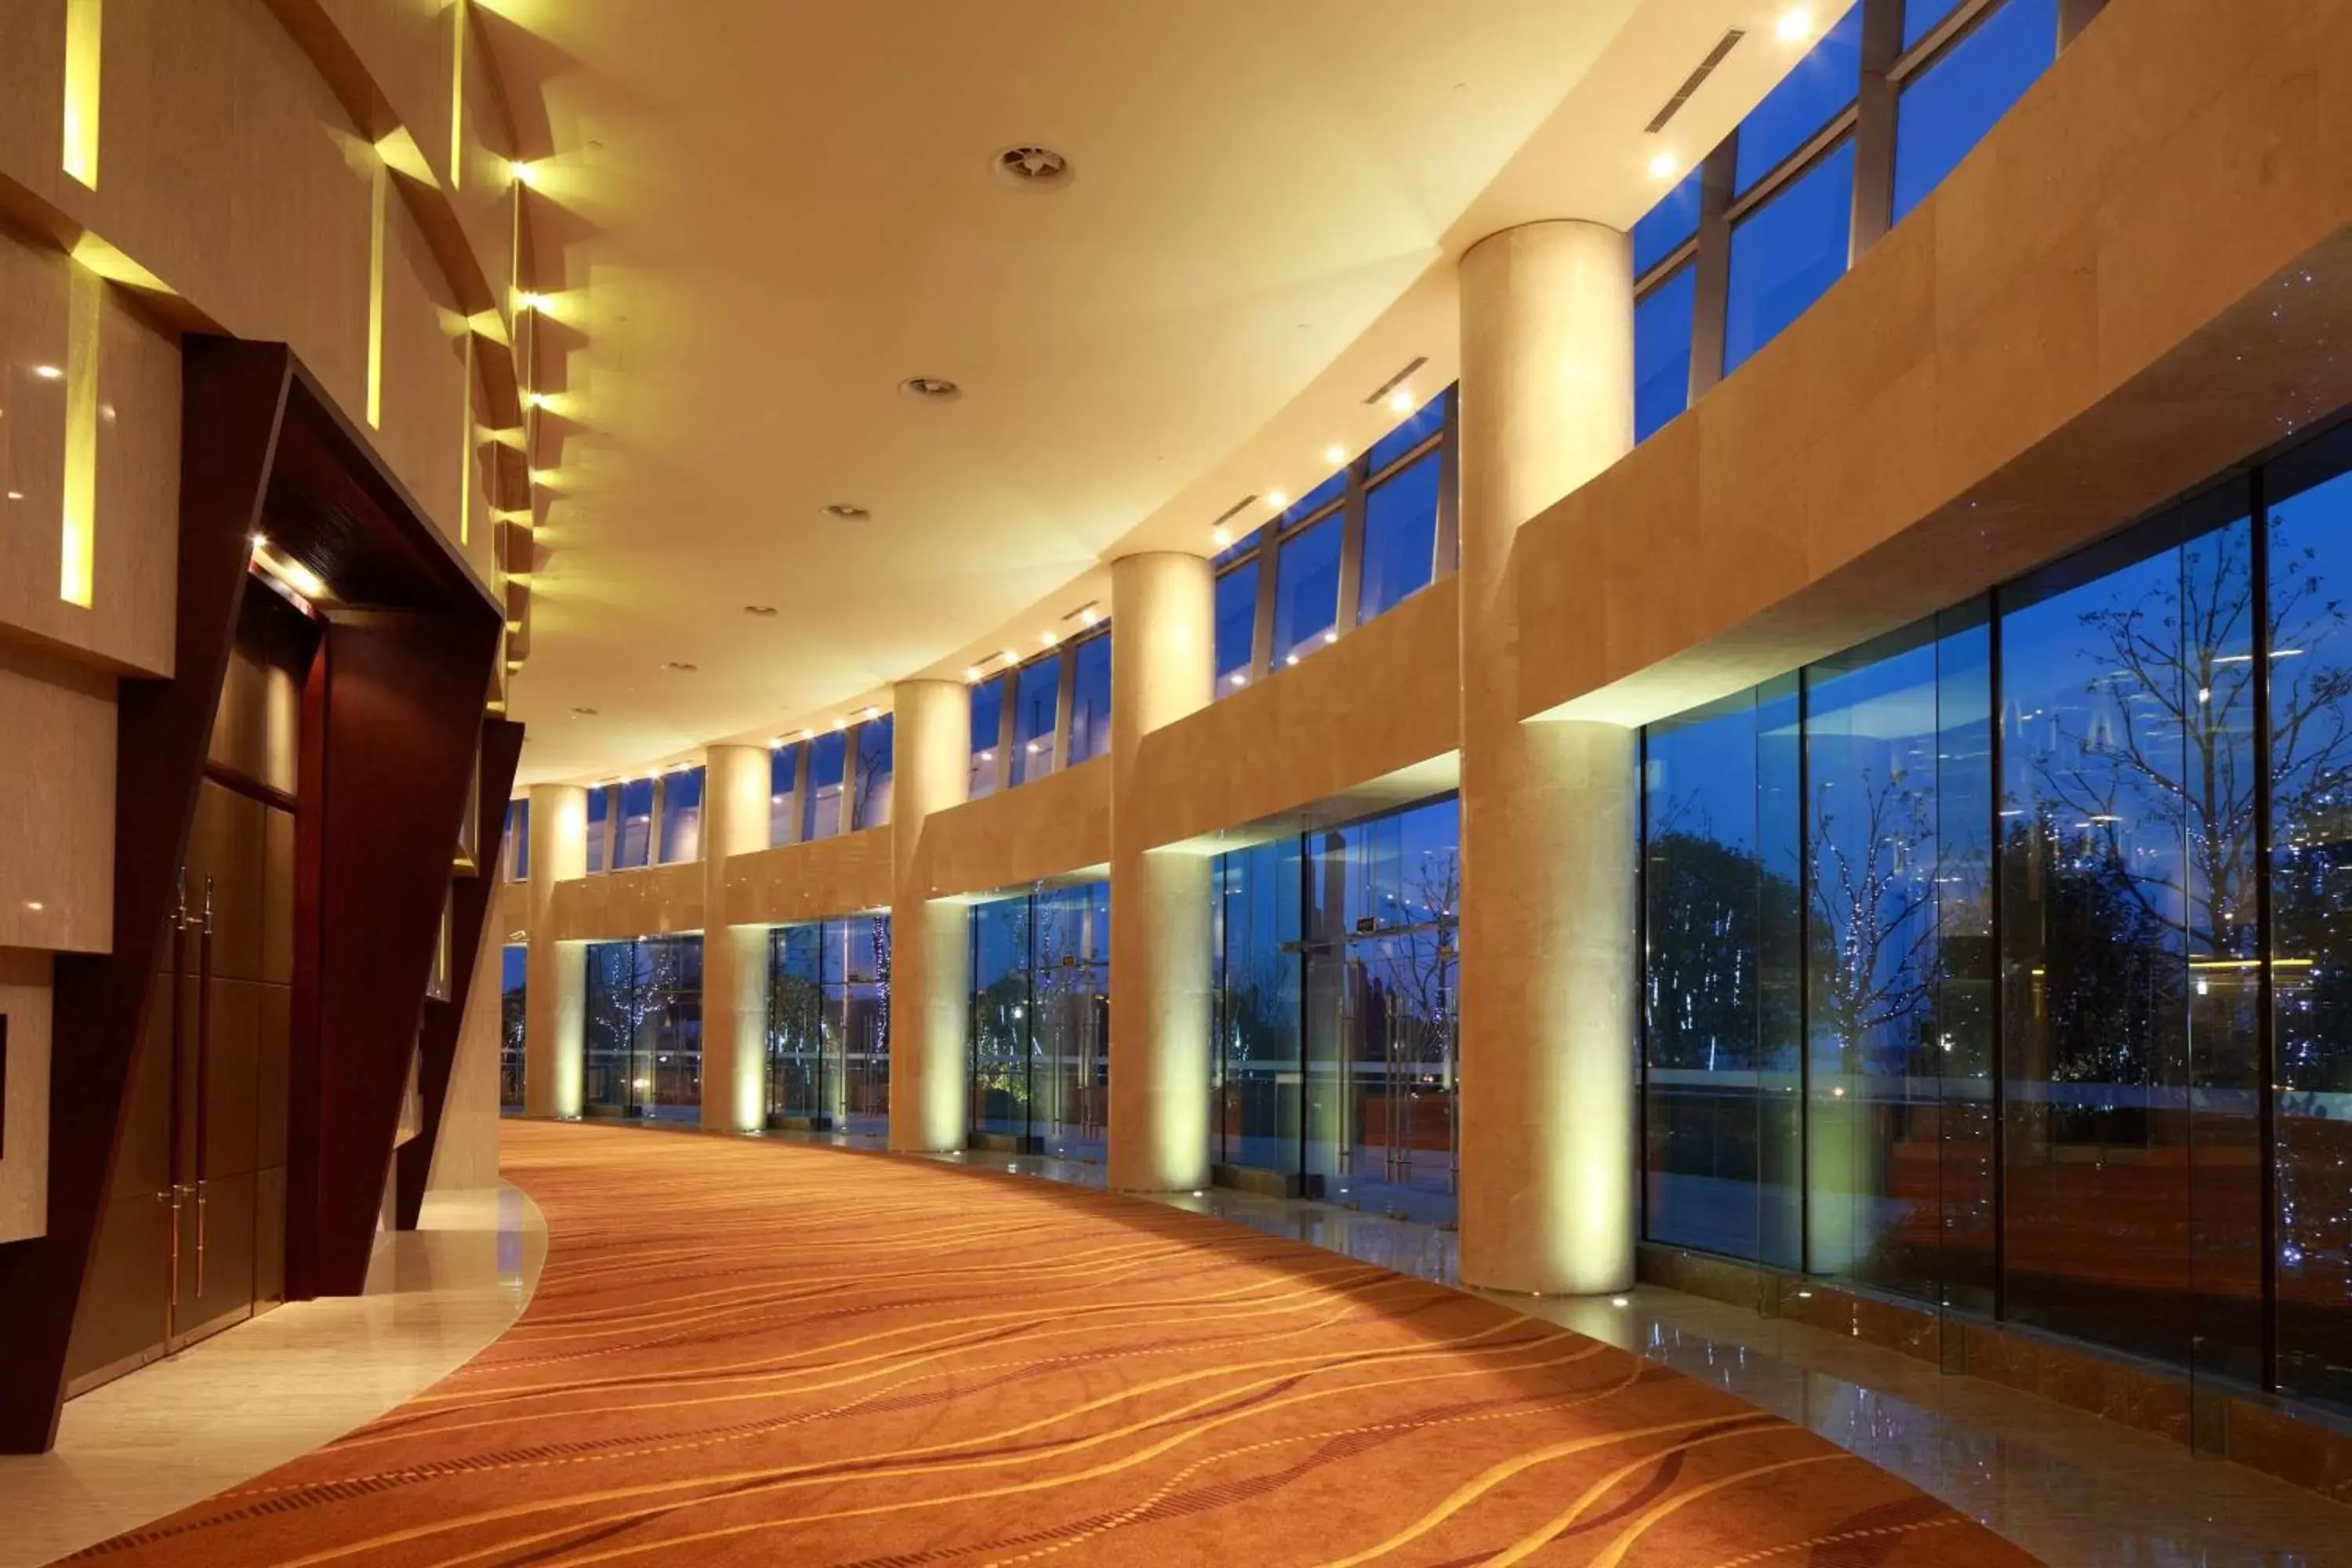 Meeting/conference room in Hilton Nanjing Riverside